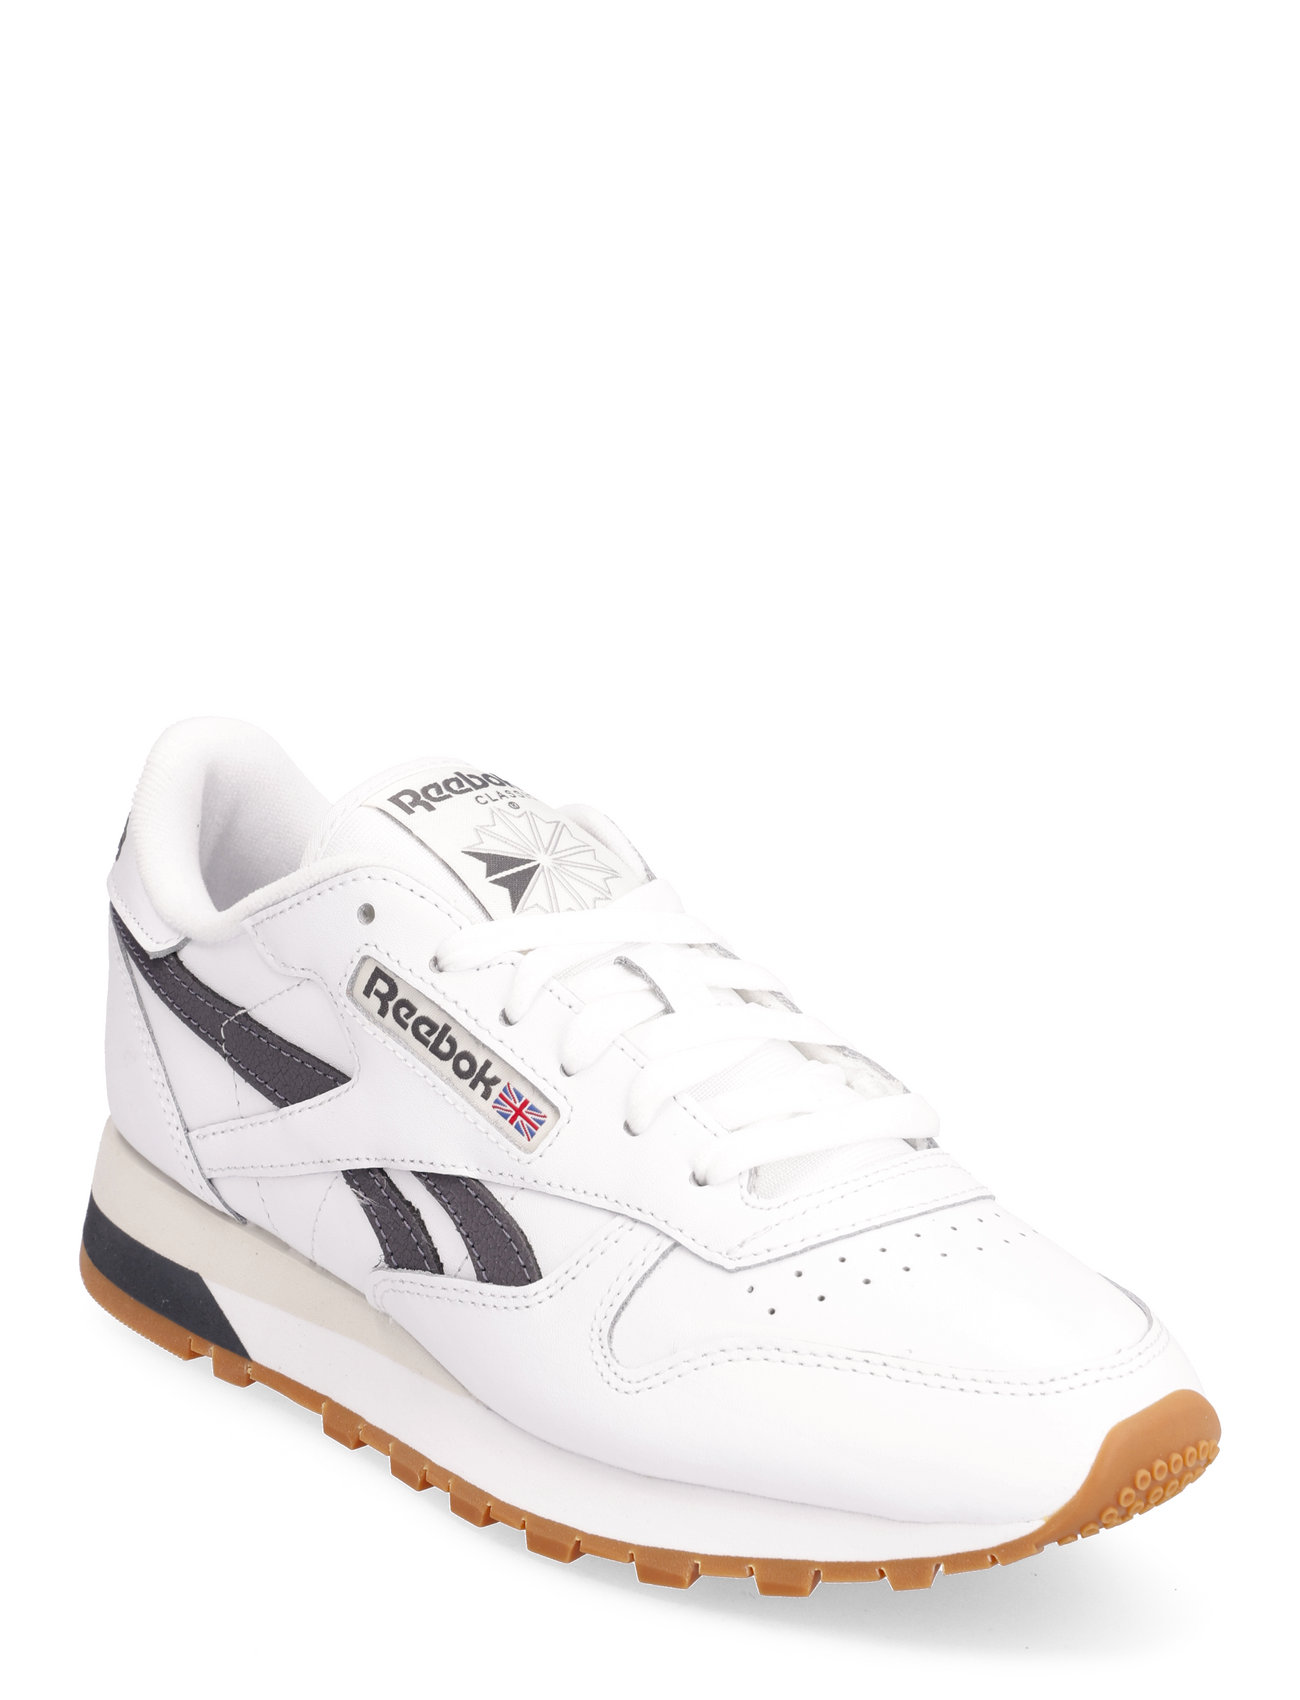 Reebok Classics Classic Leather Lave sneakers |